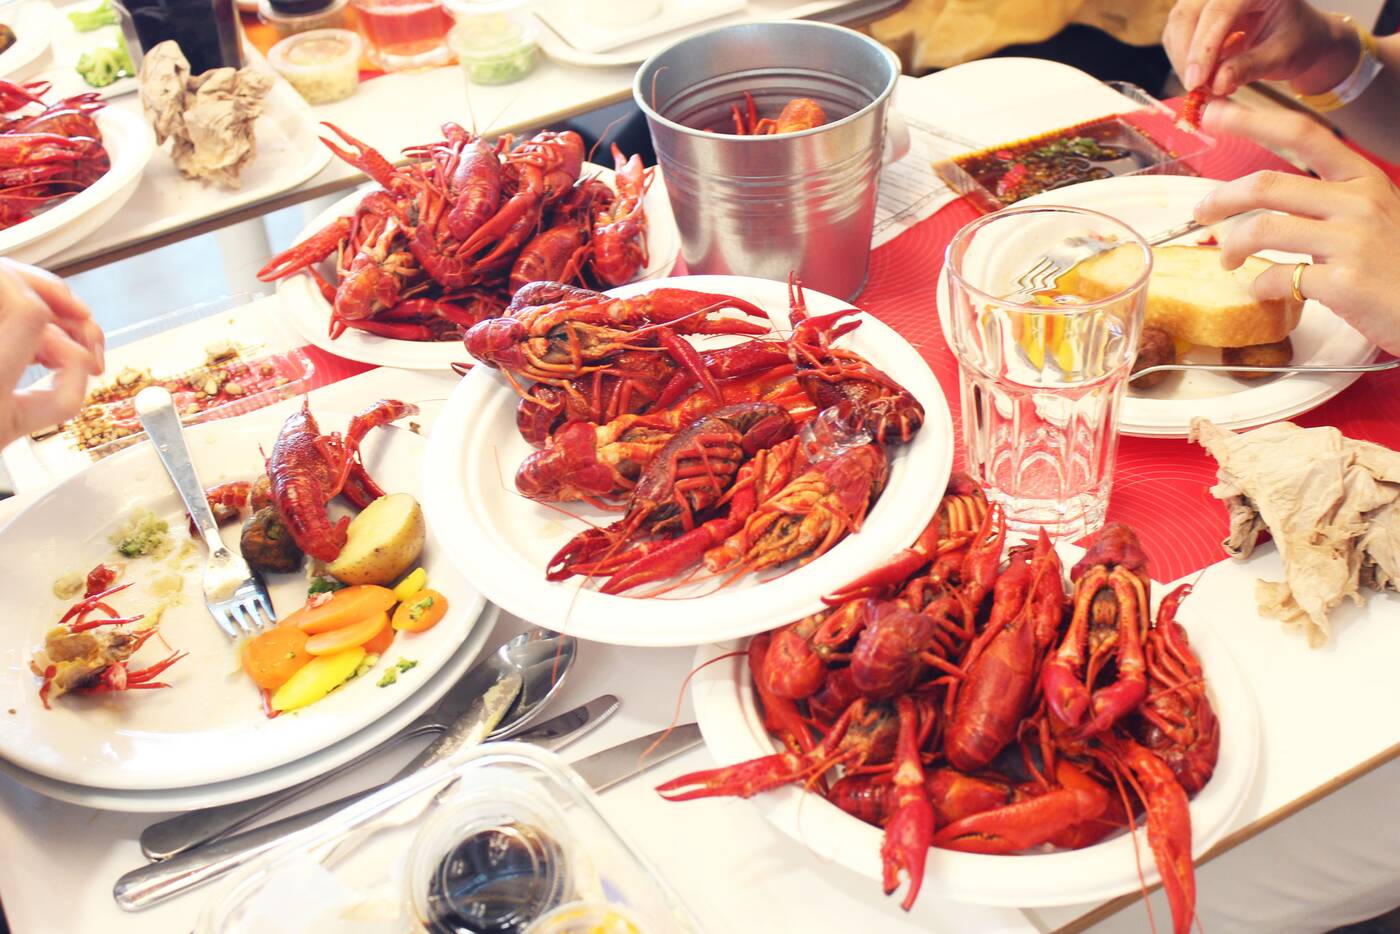 Hundreds flooded IKEA in Toronto for a massive crayfish buffet